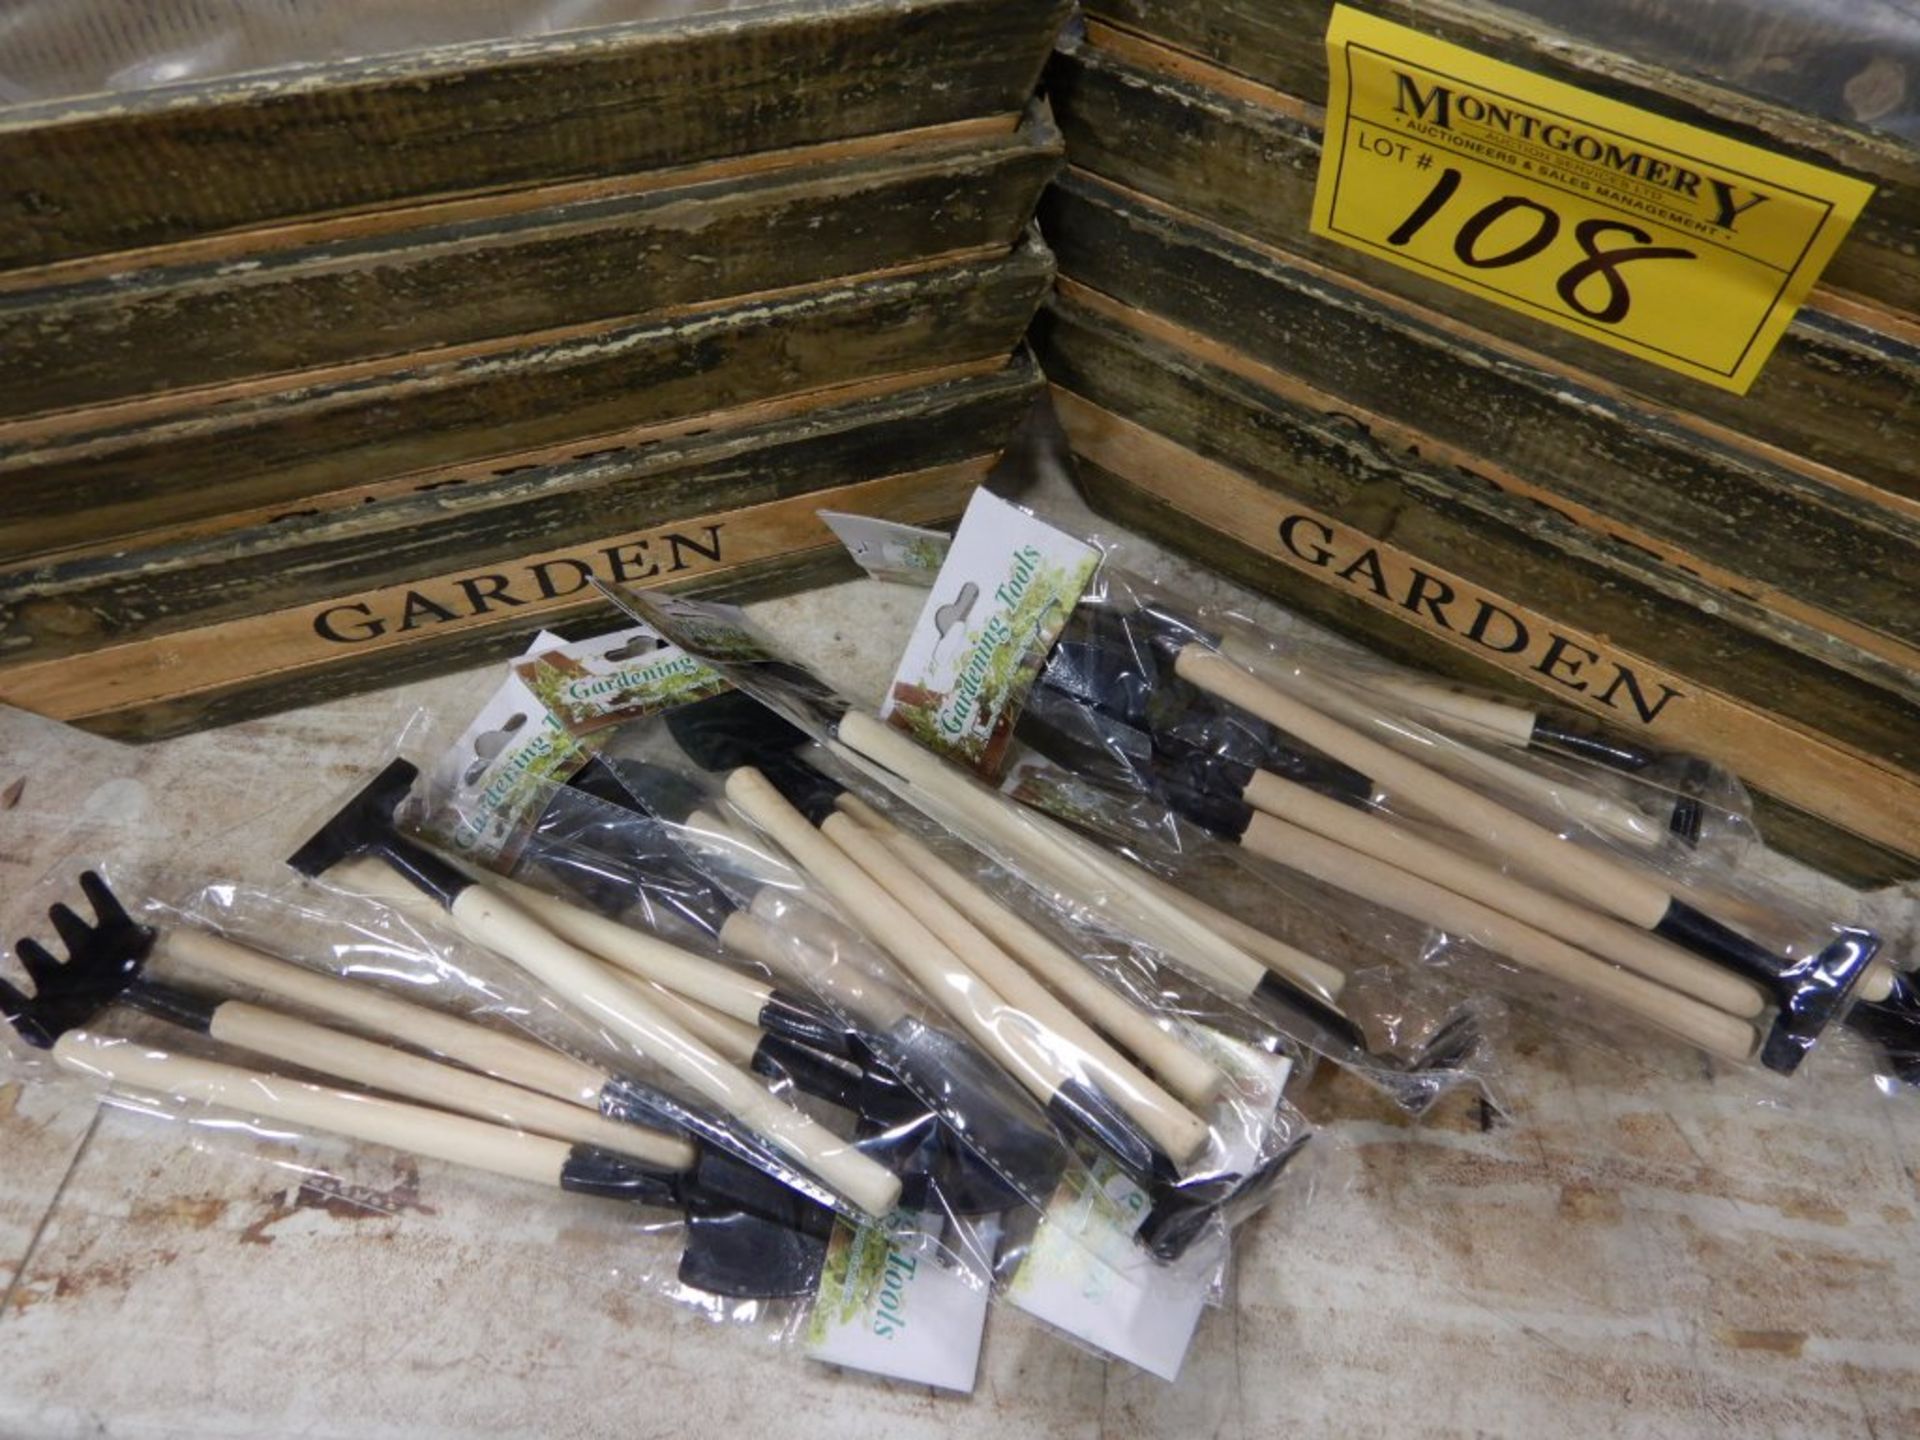 L/O GARDEN WOODEN PLANT BOXES, L/O SMALL GARDENING TOOLS - Image 2 of 2